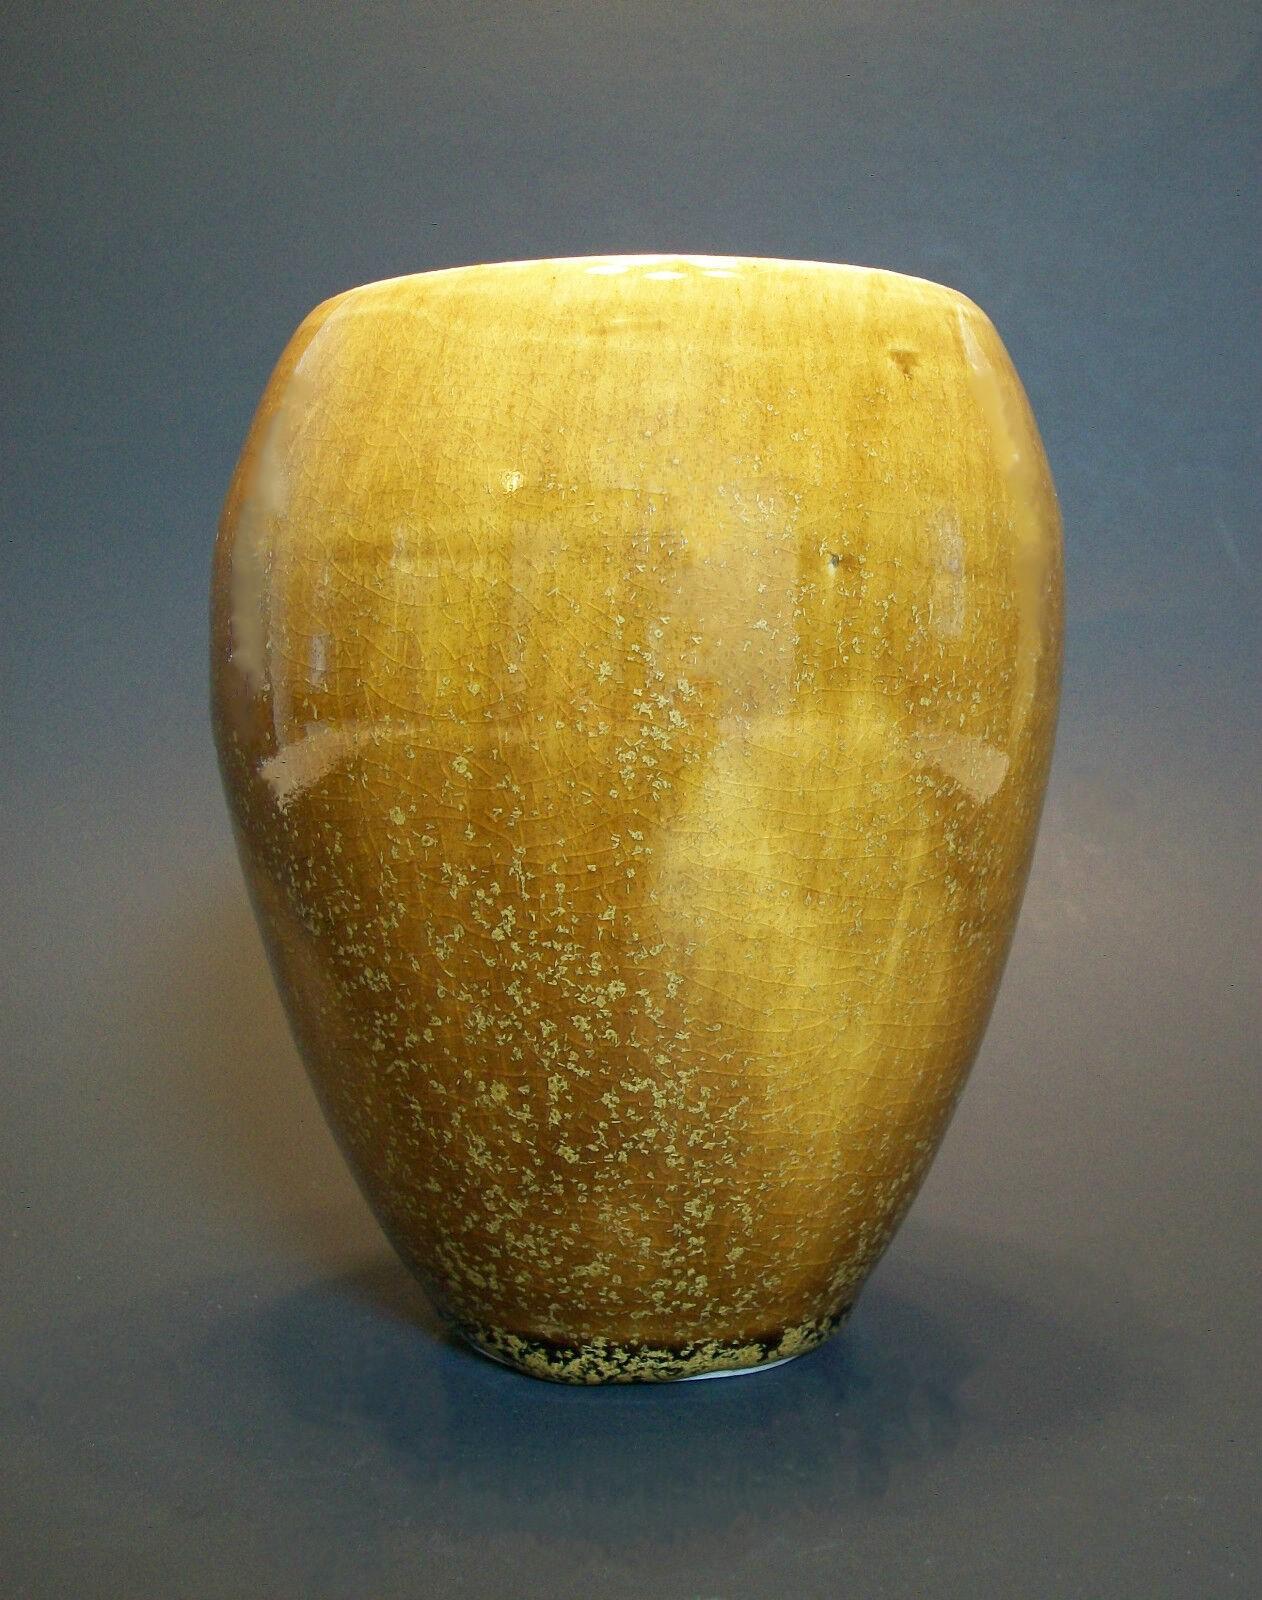 Vintage studio pottery vase with glossy butterscotch glaze - wheel thrown body - initialed on the base - Canada - late 20th century.

Good vintage condition - irregular body & glaze that comes with studio pottery and hand made items - no loss - no